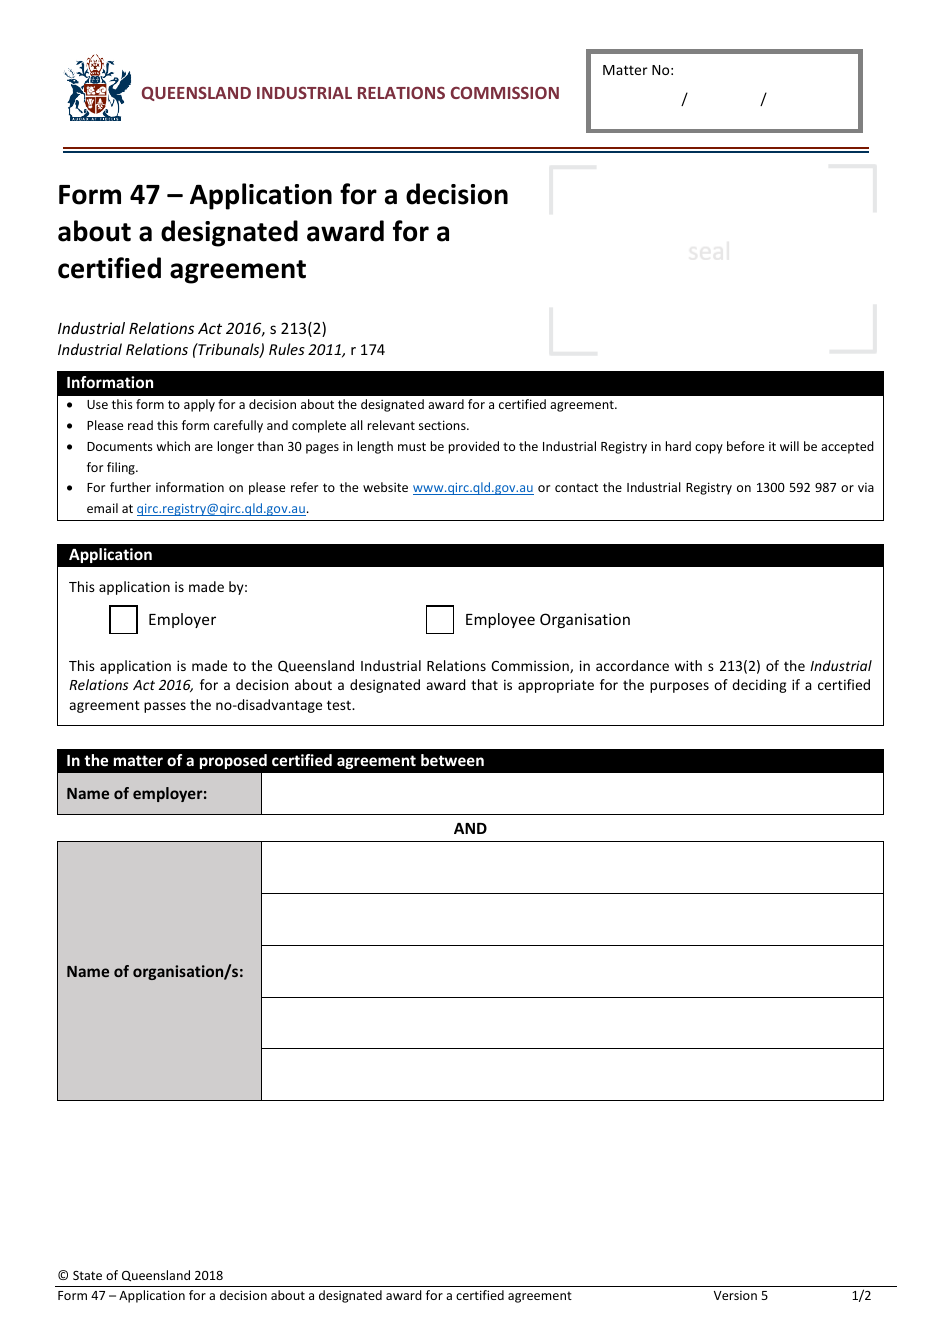 Form 47 Application for a Decision About a Designated Award for a Certified Agreement - Queensland, Australia, Page 1